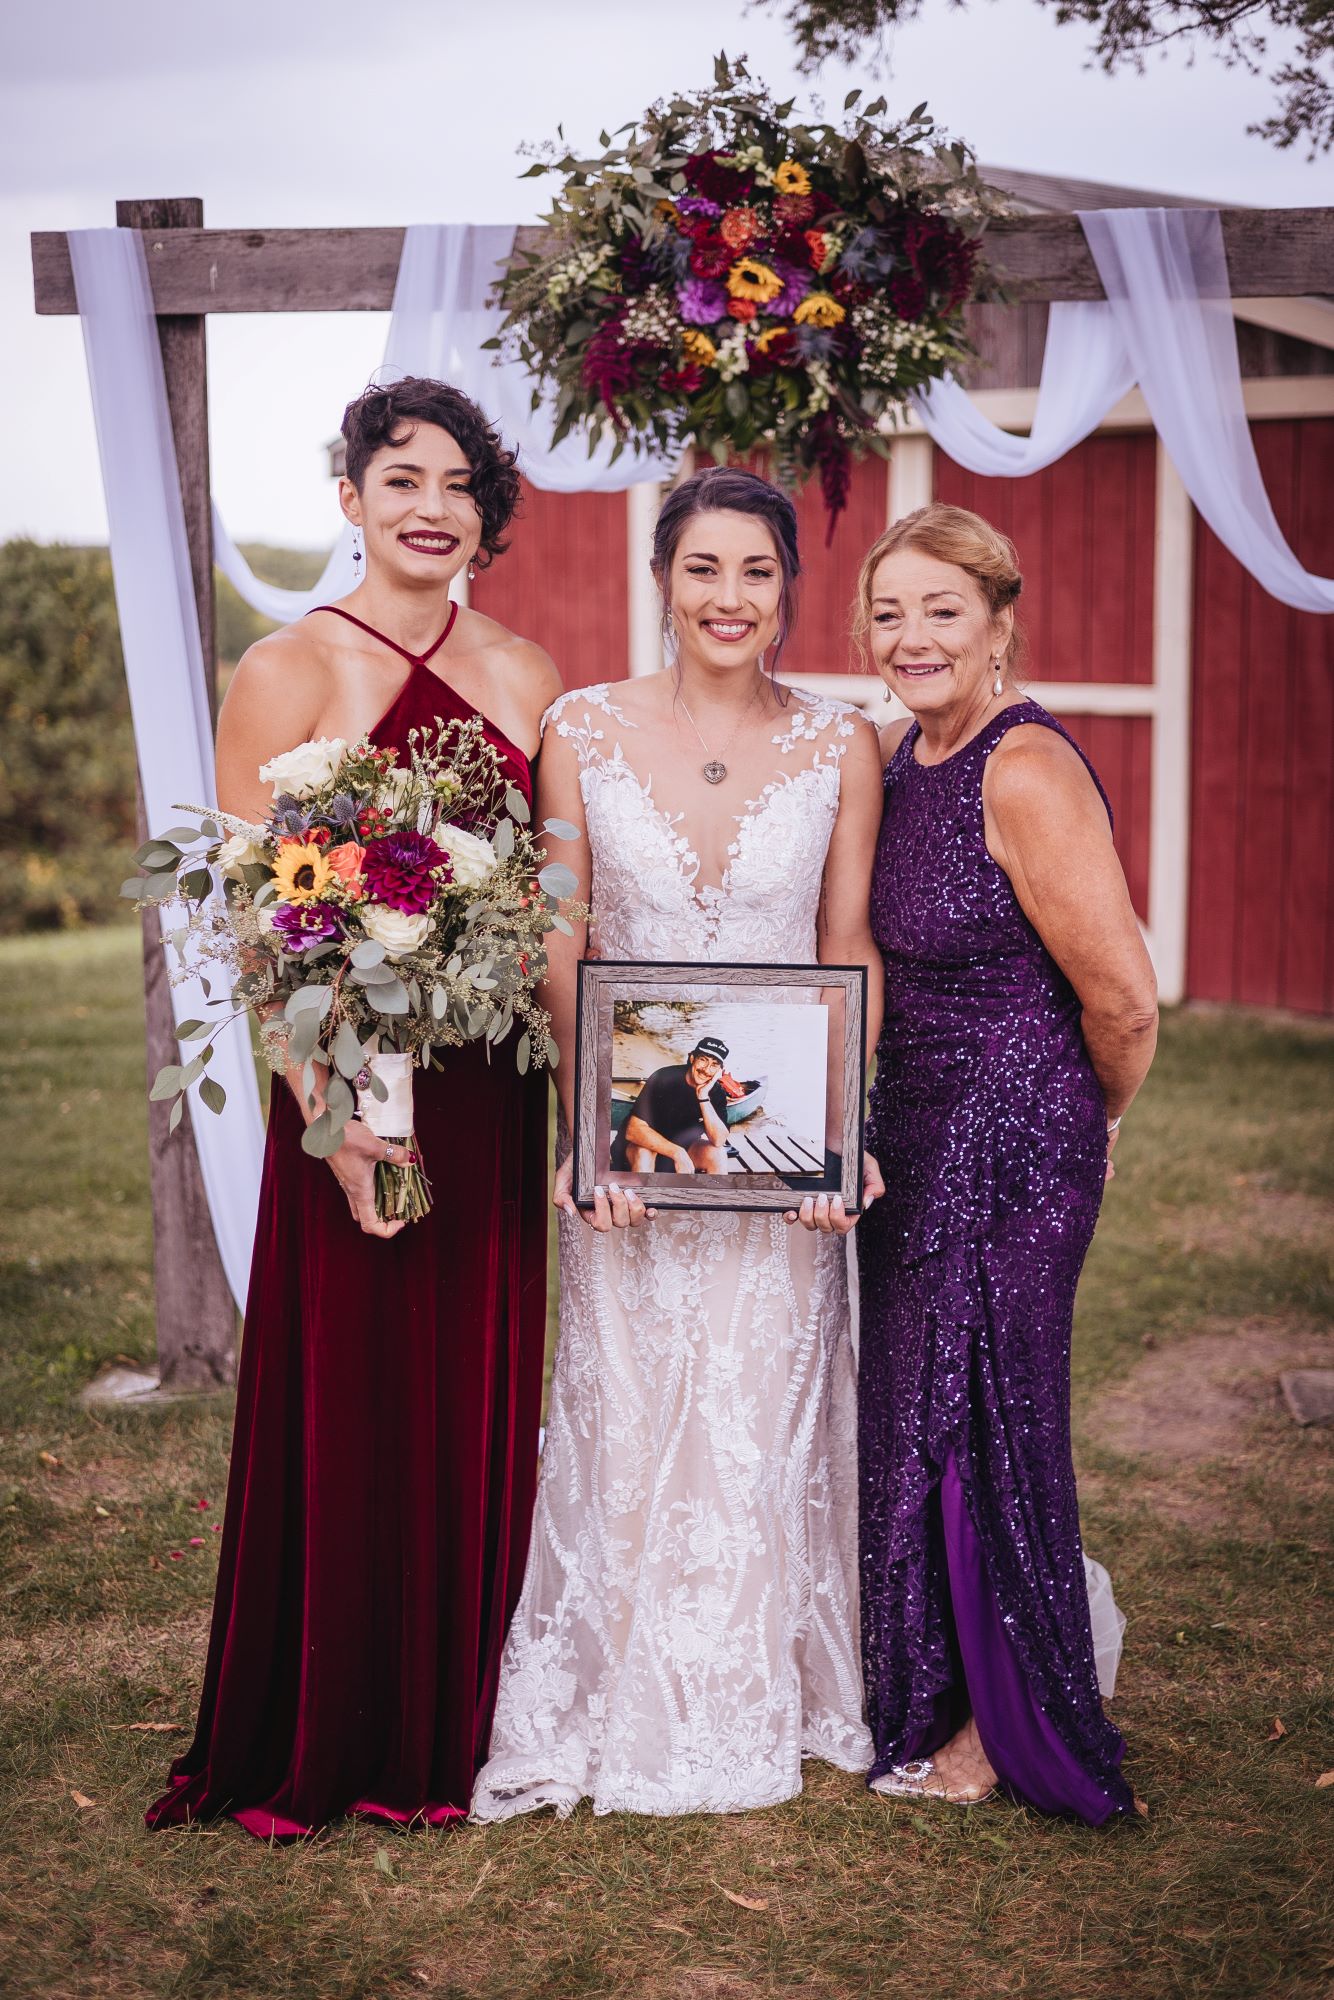 ways to honor a loved one at your wedding